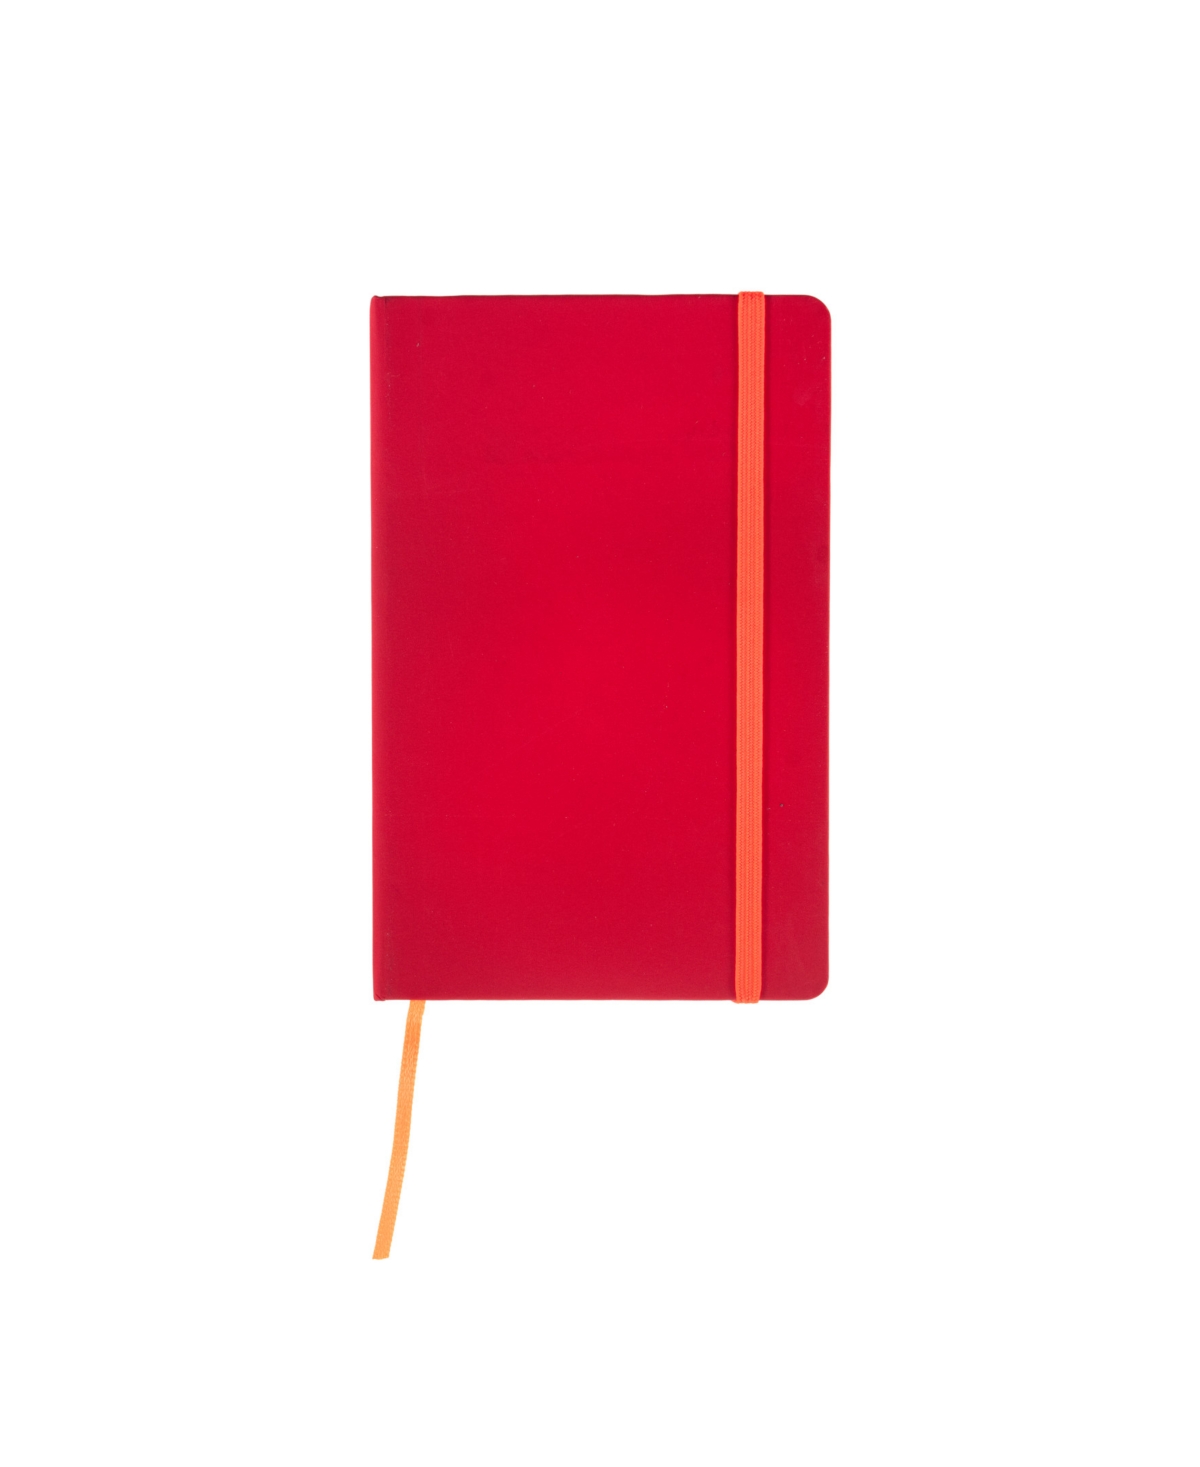 Ispira Hard Cover Lined Notebook, 3.5" x 5.5" - Red